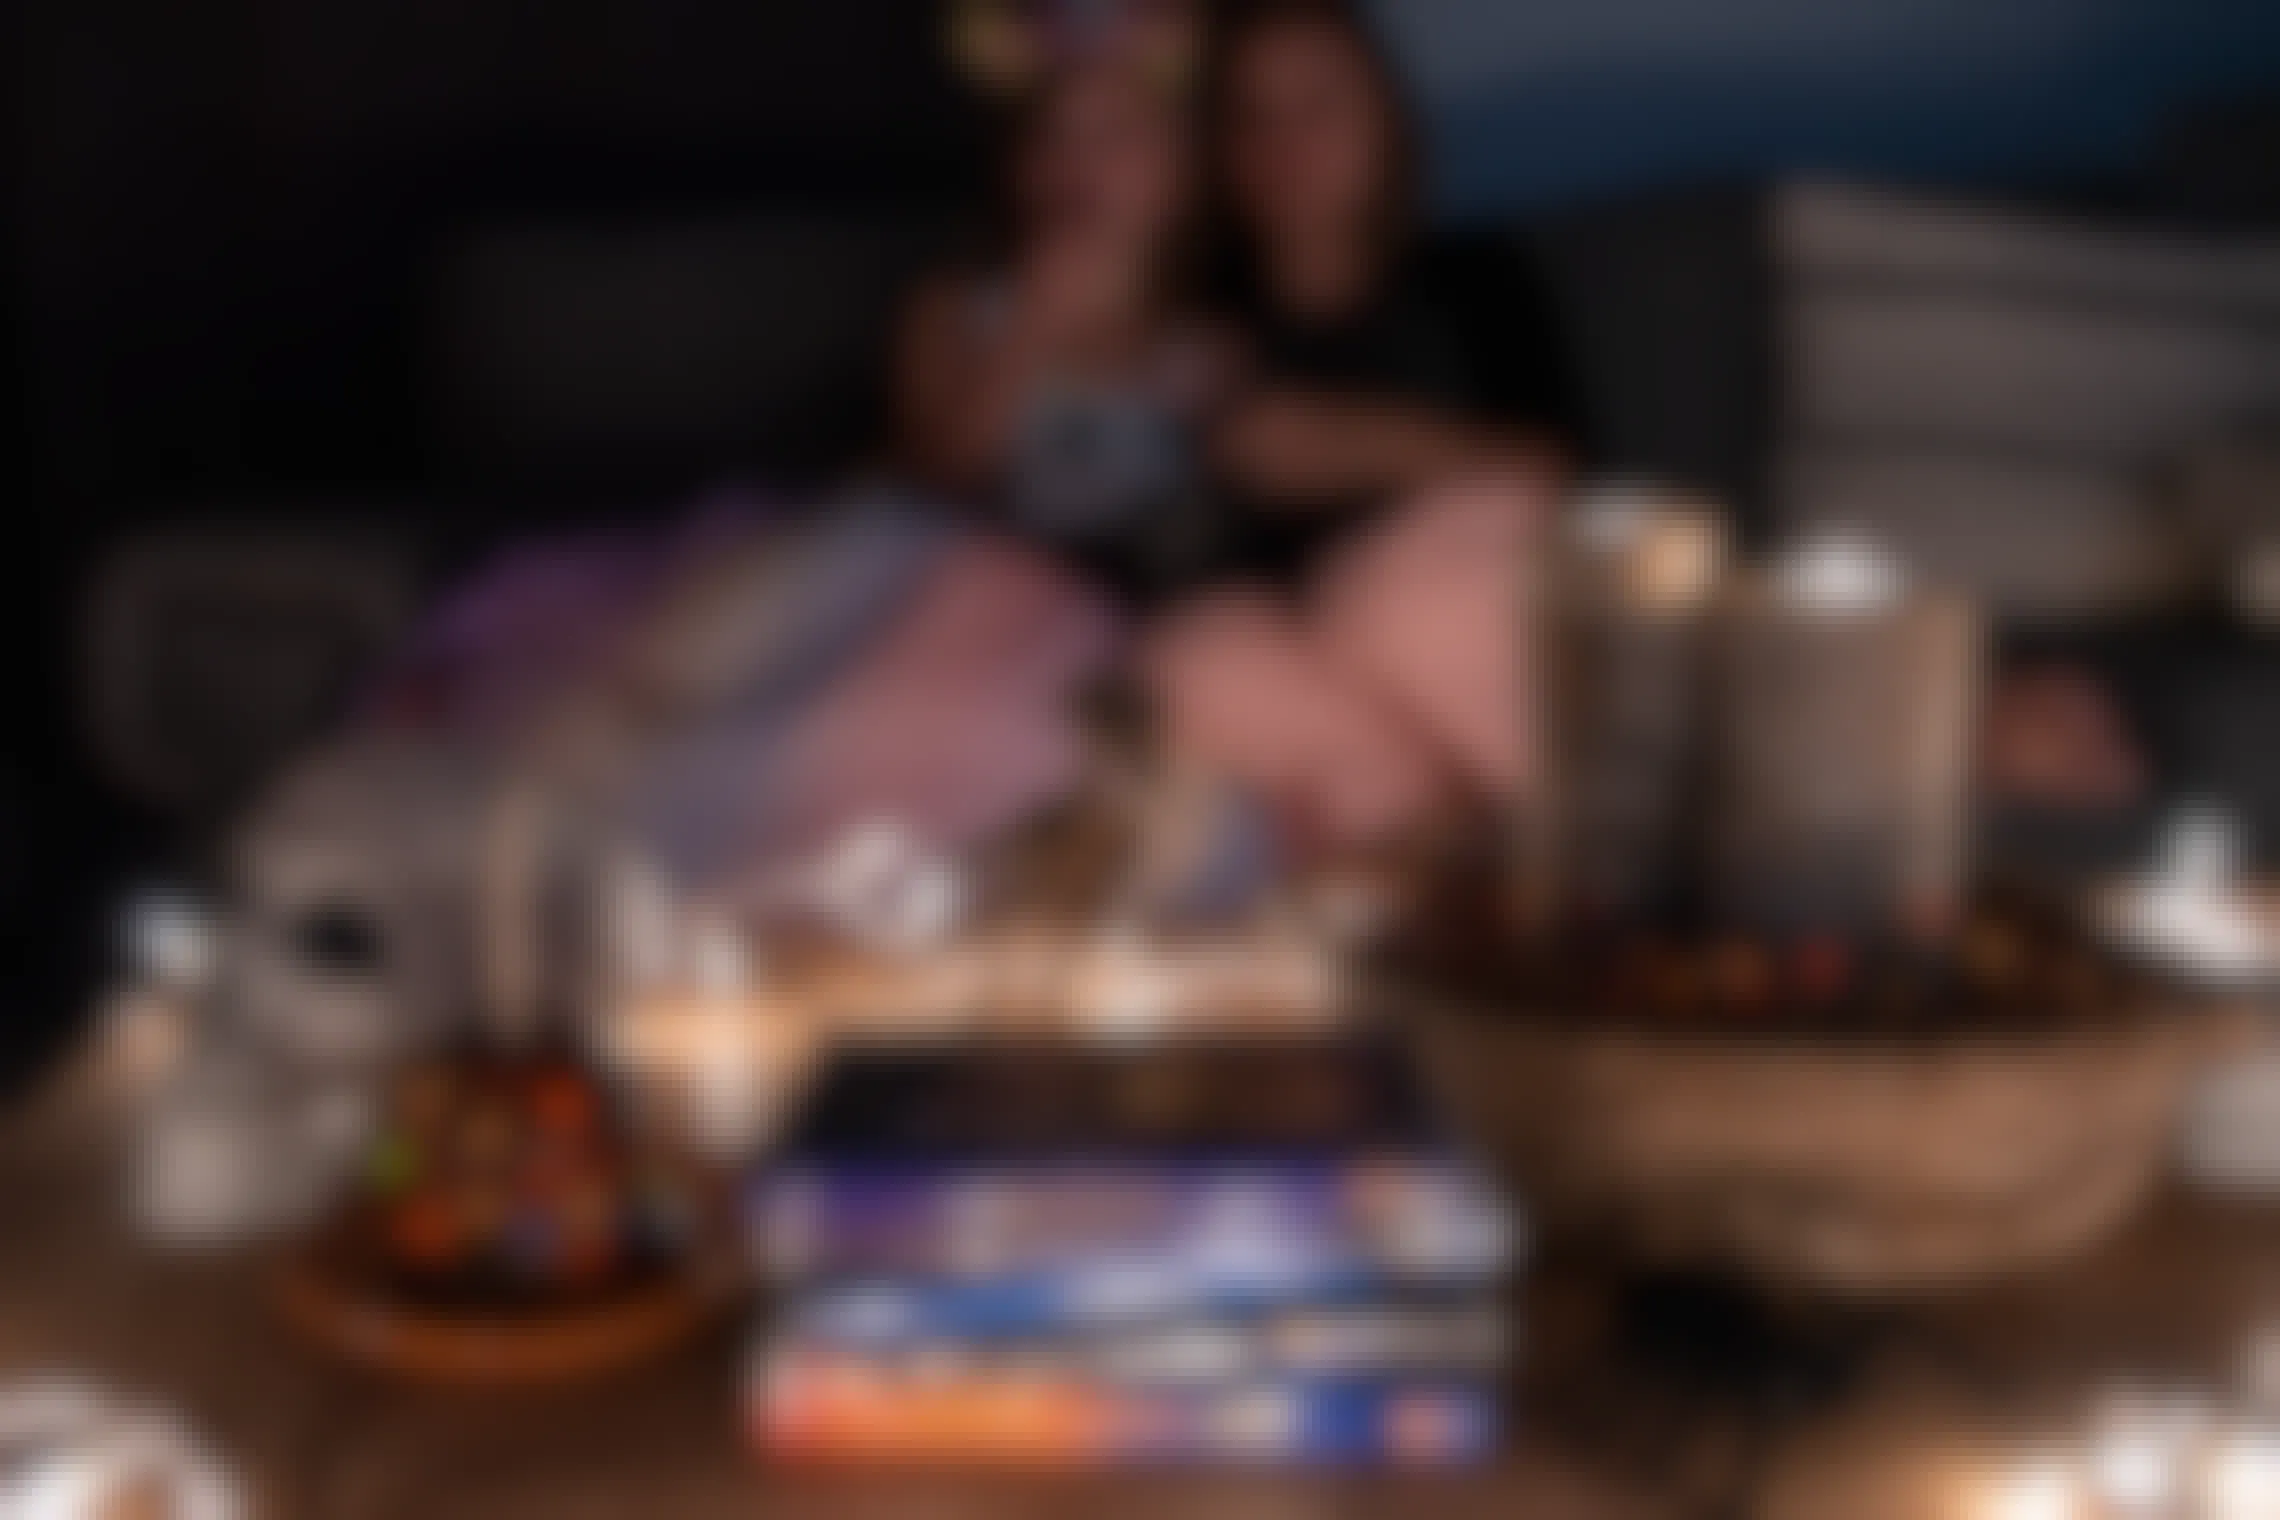 A woman and child eating popcorn watching a movie, with a table filled with treats, candles, and other halloween kids movies.